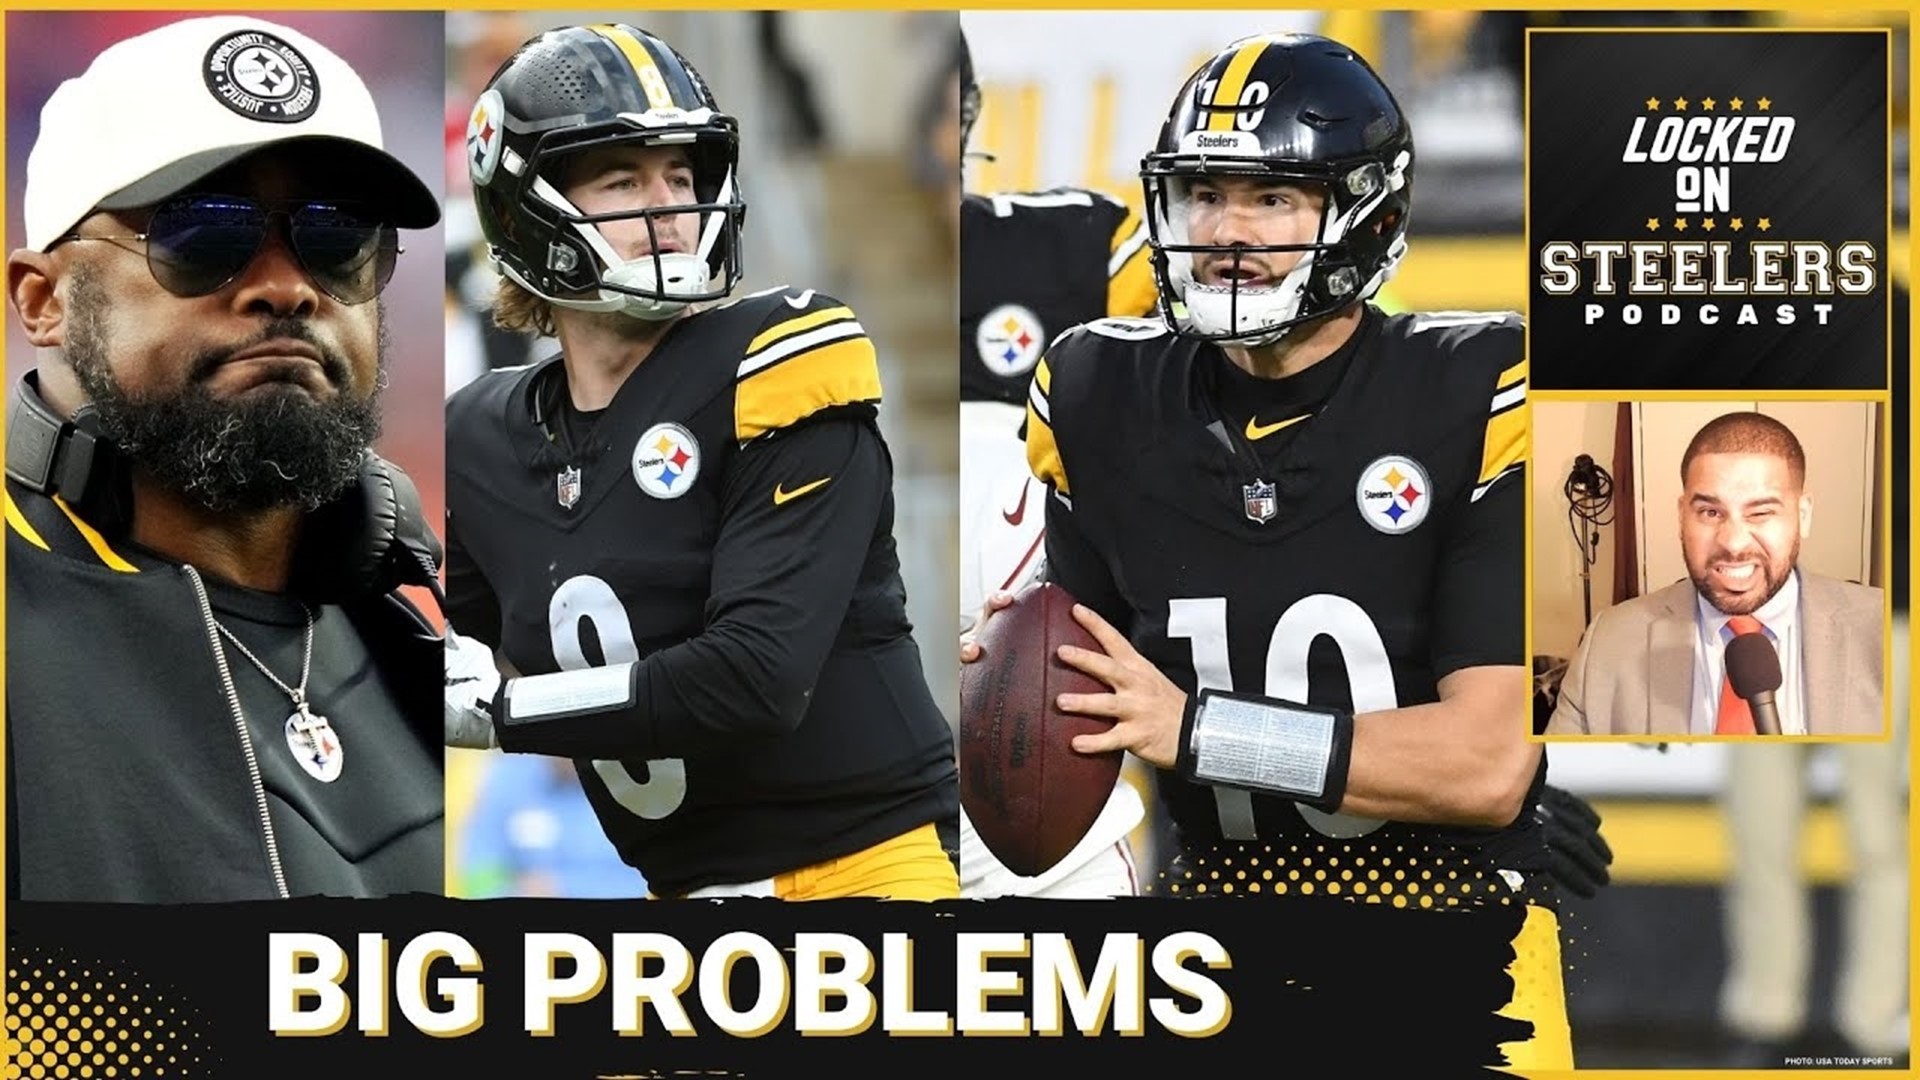 The Pittsburgh Steelers' 24-10 loss to the Arizona Cardinals is a sign of bigger problems for the playoff hopeful AFC North team.